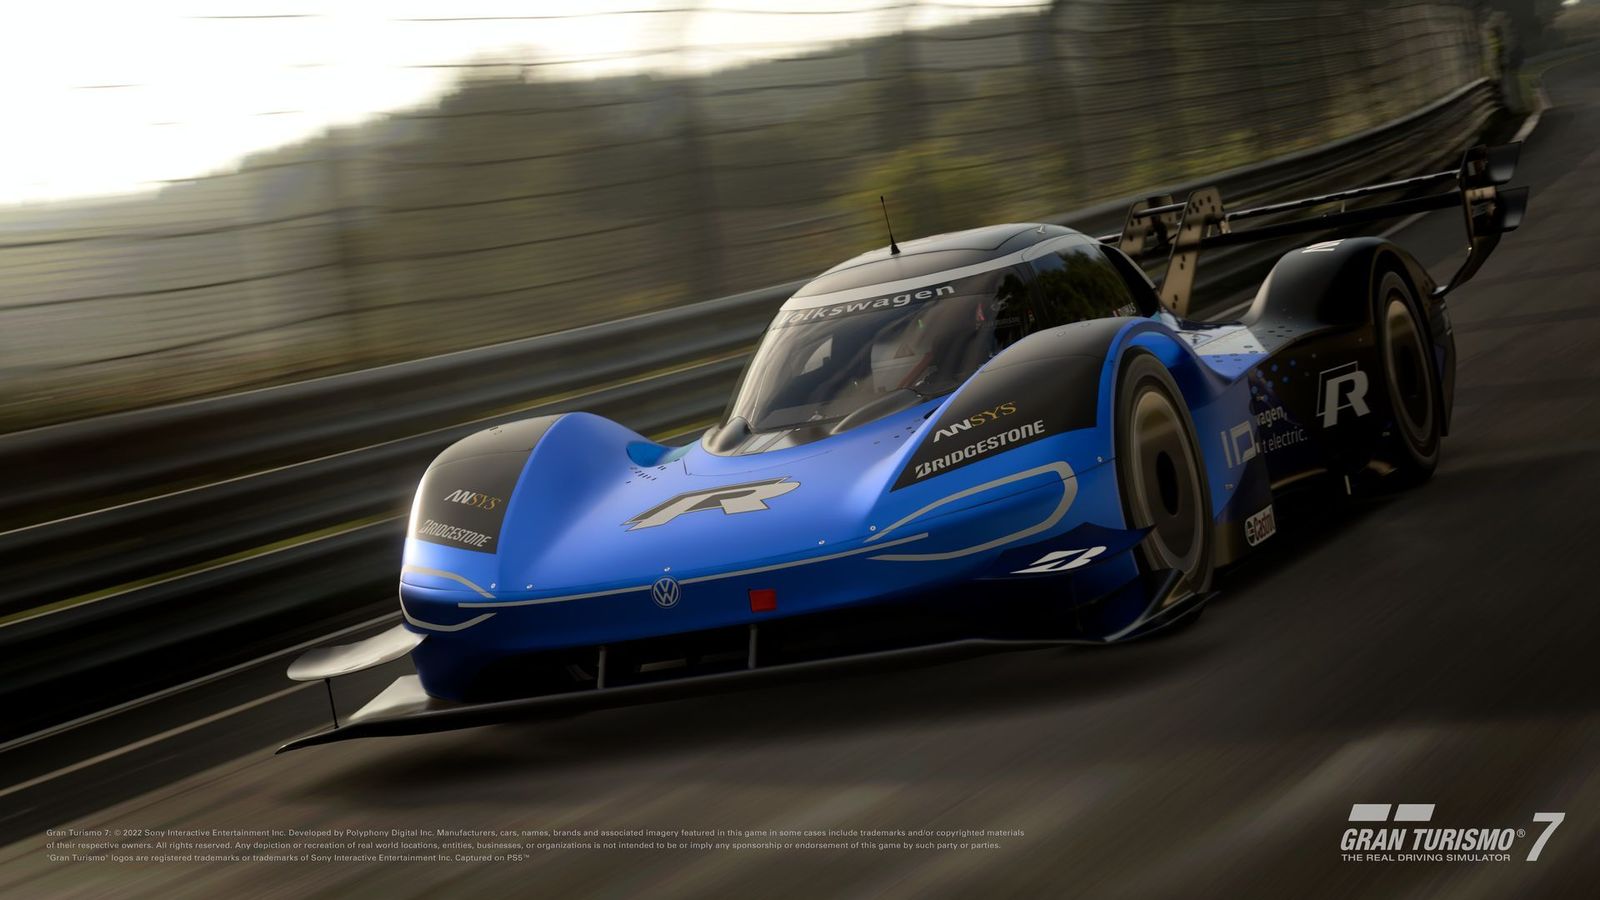 Where is the Gran Turismo 7 January update